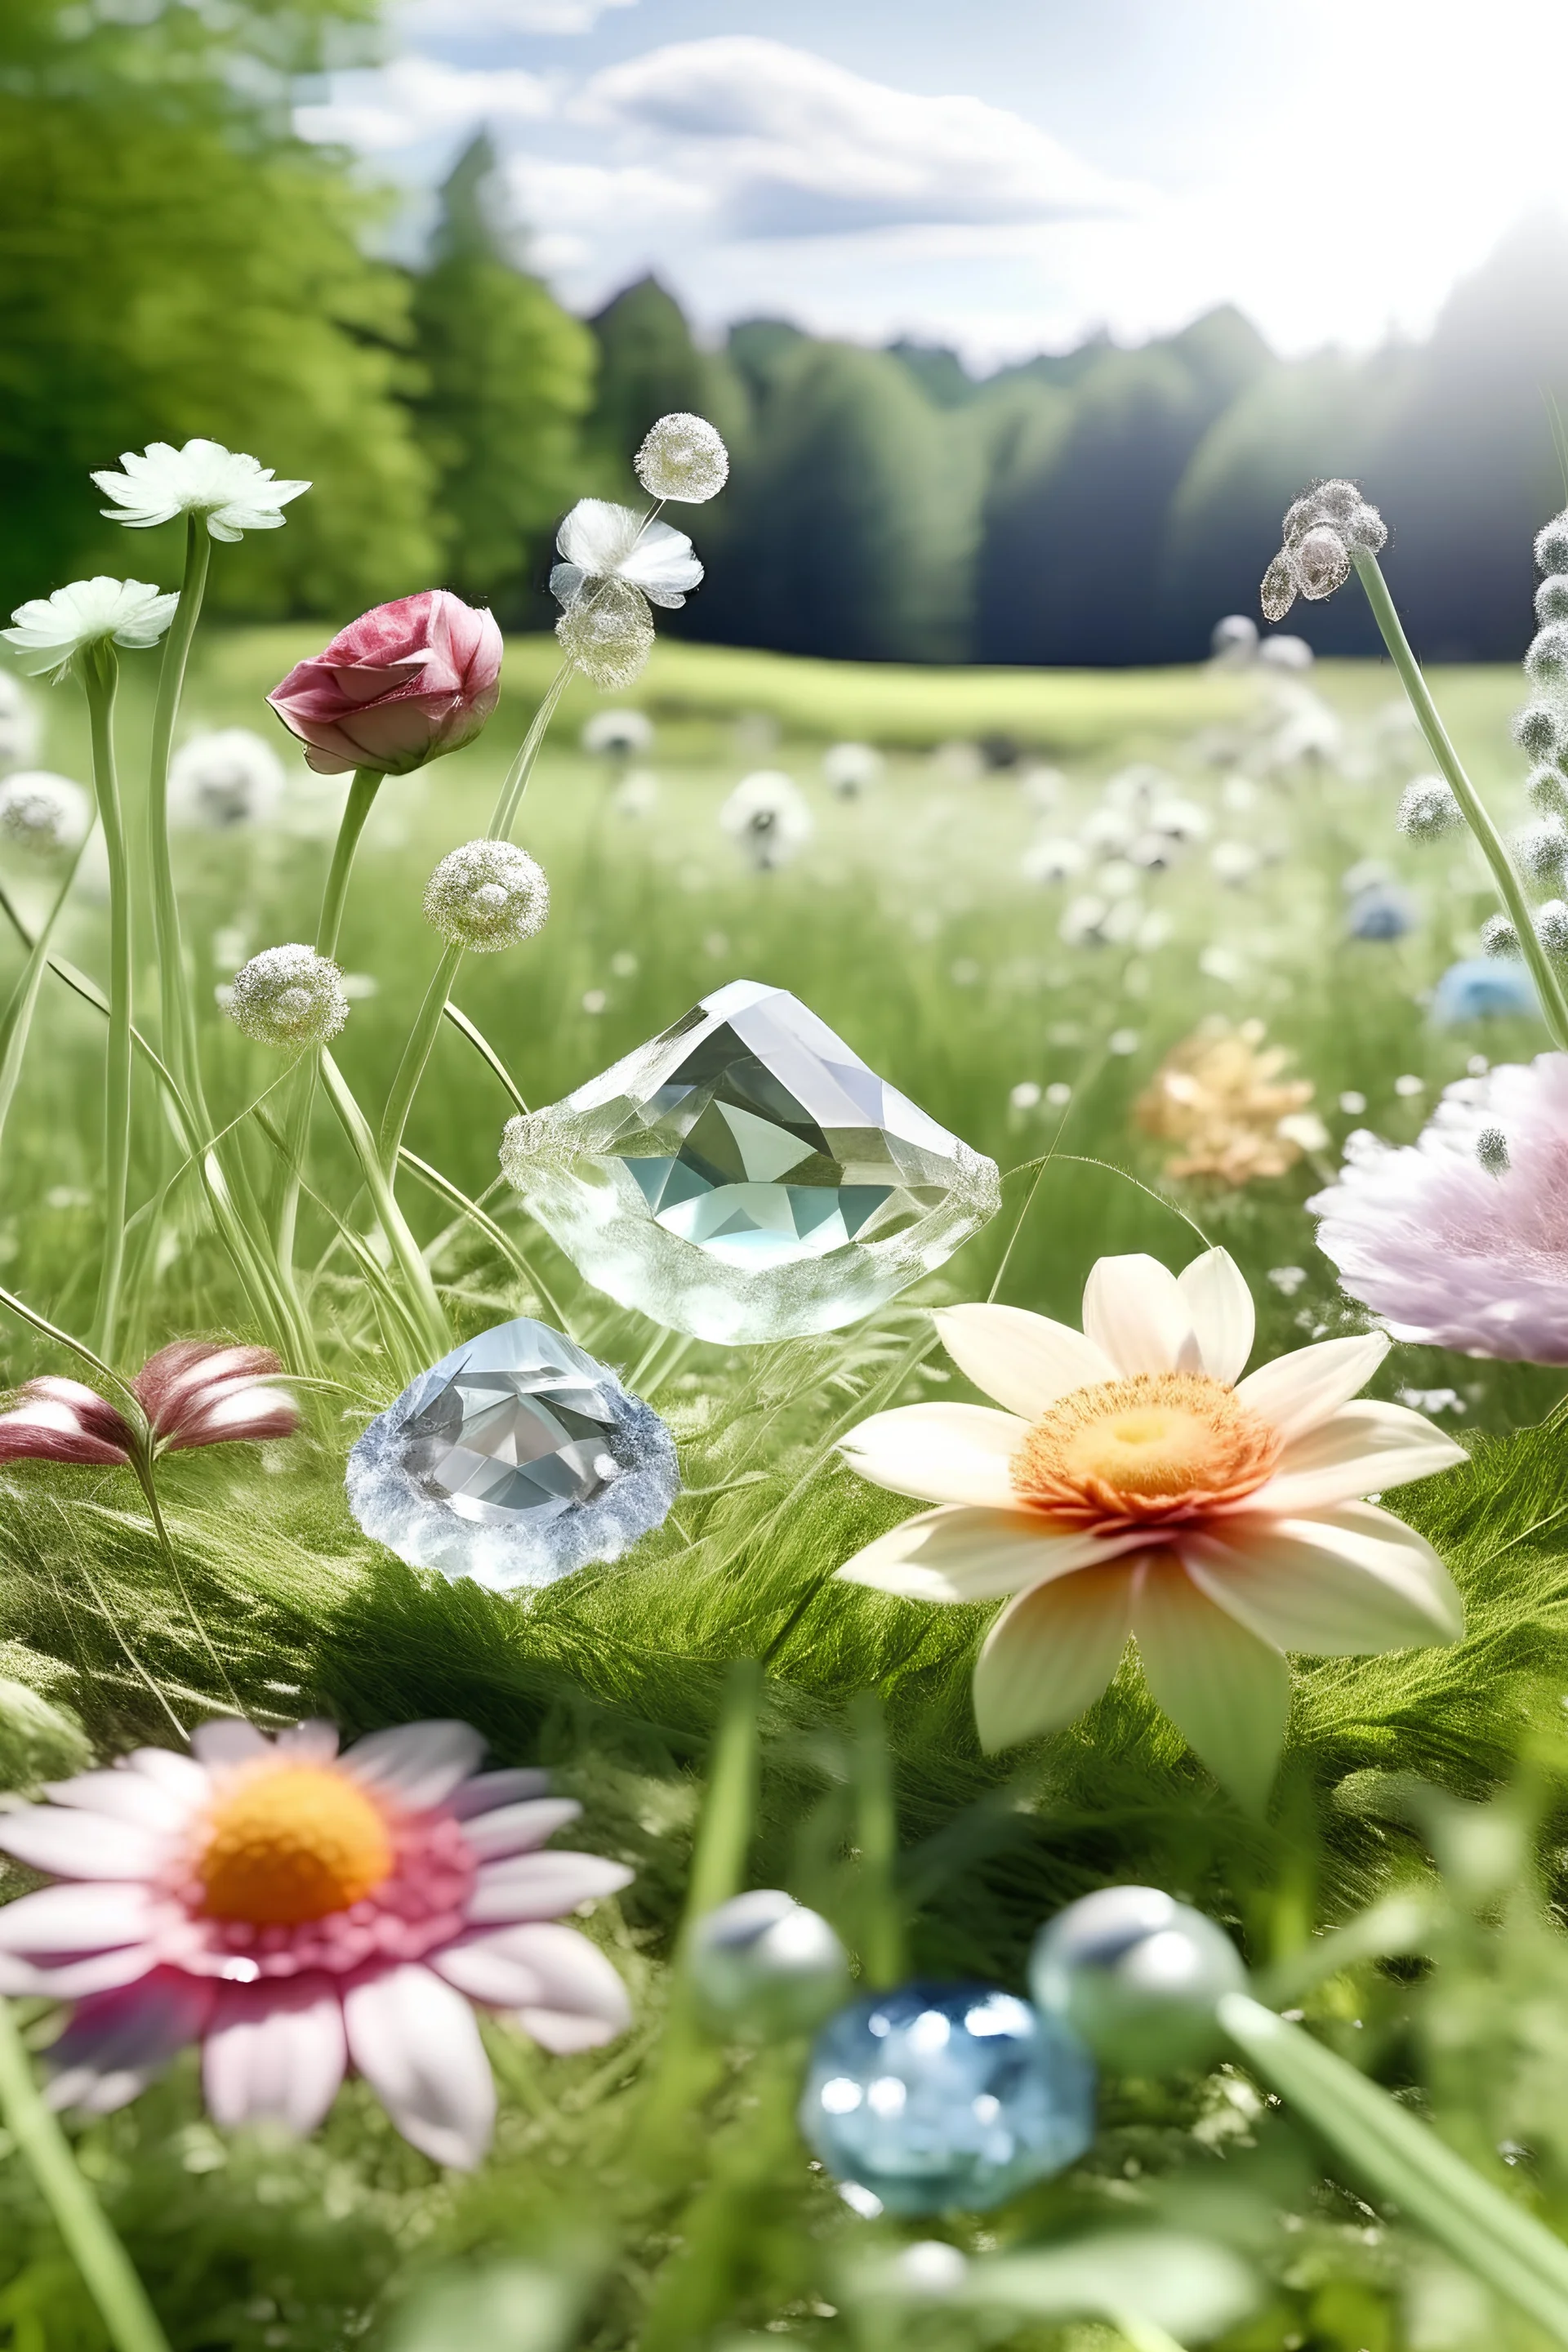 flowers and crystal in a filed with trees in background in a childhood style